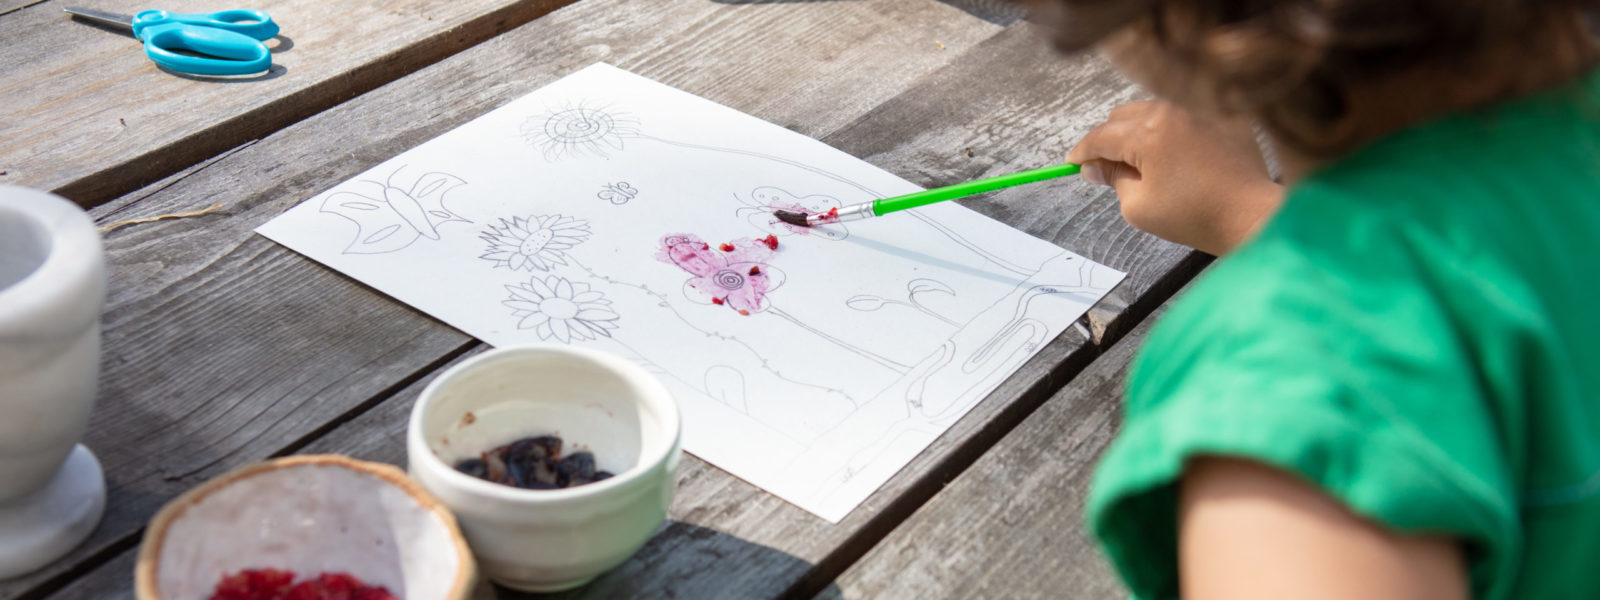 A child in a green shirt painting a paper with pressed berries